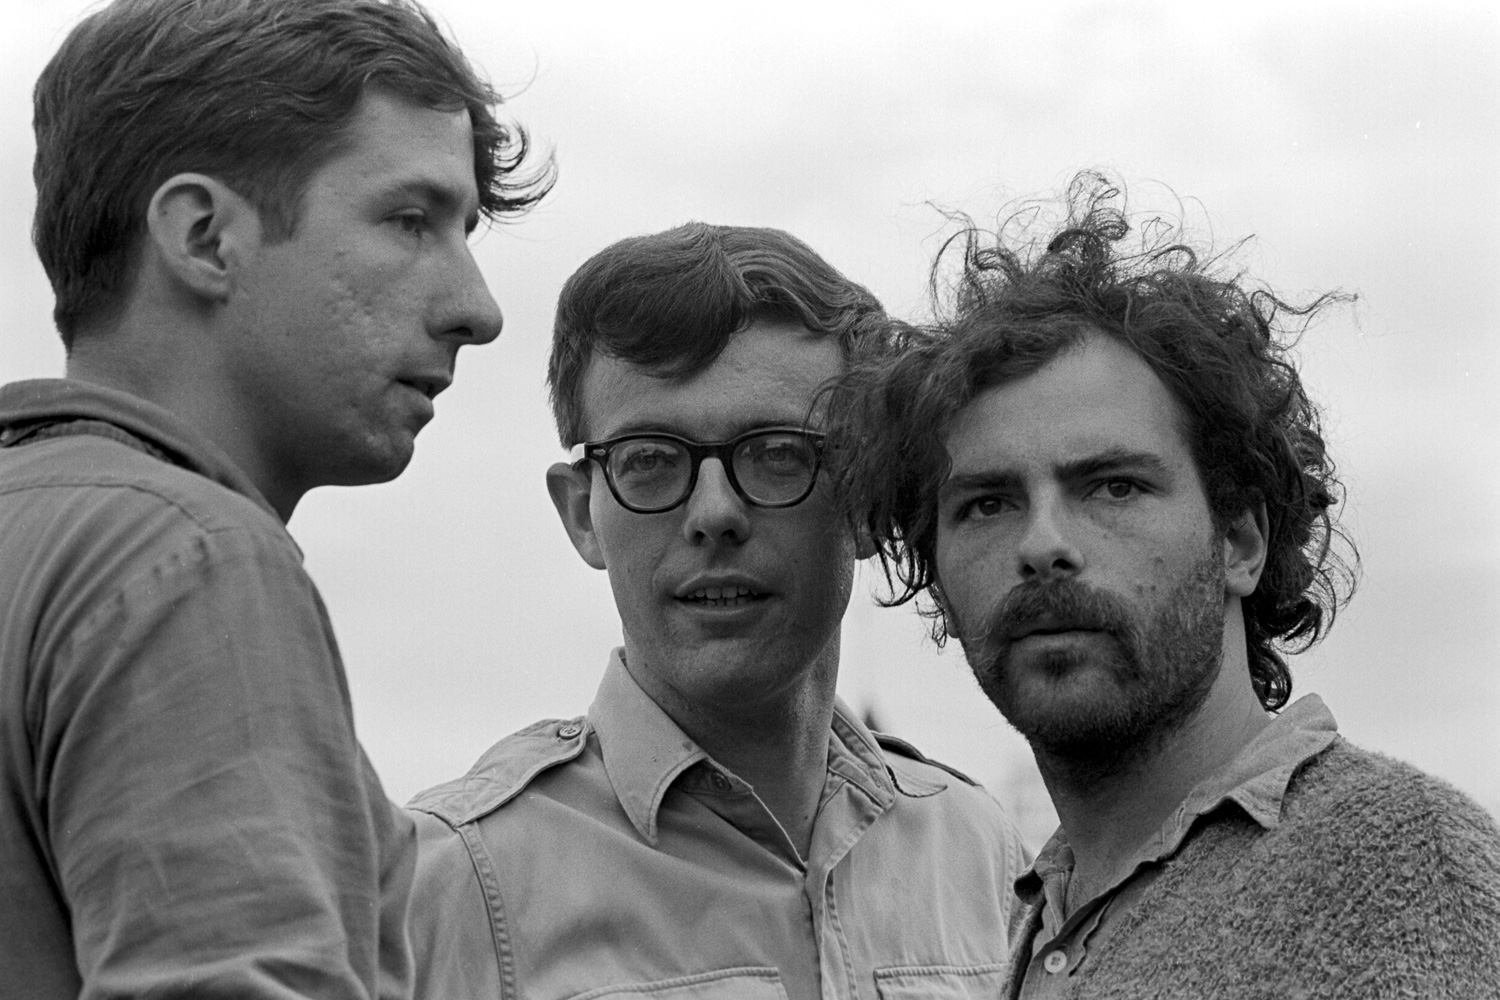  Tom Hayden (left), Rennie Davis (center) and Jerry Rubin (right) put their heads together in the open air at Lincoln Park. 